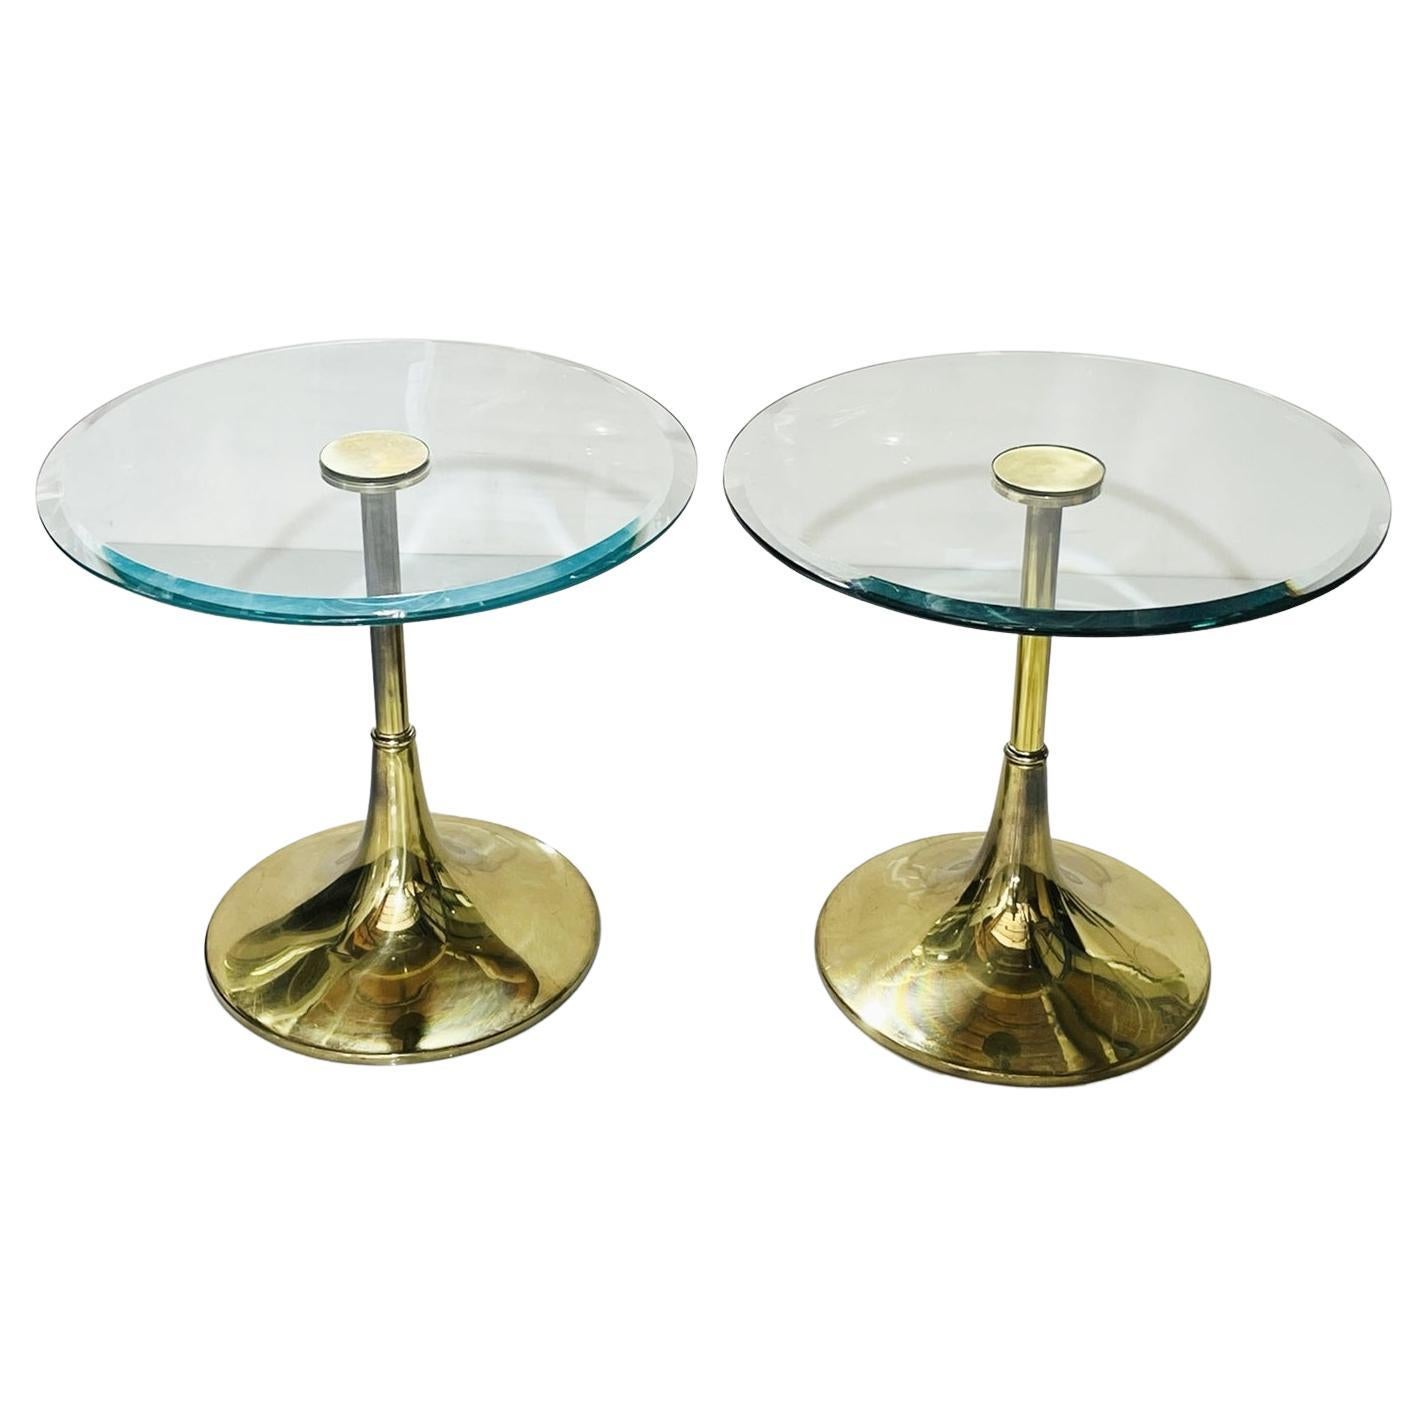 Pair of Charles Hollis Jones "Bugle" Base Side Tables in Brass & Glass